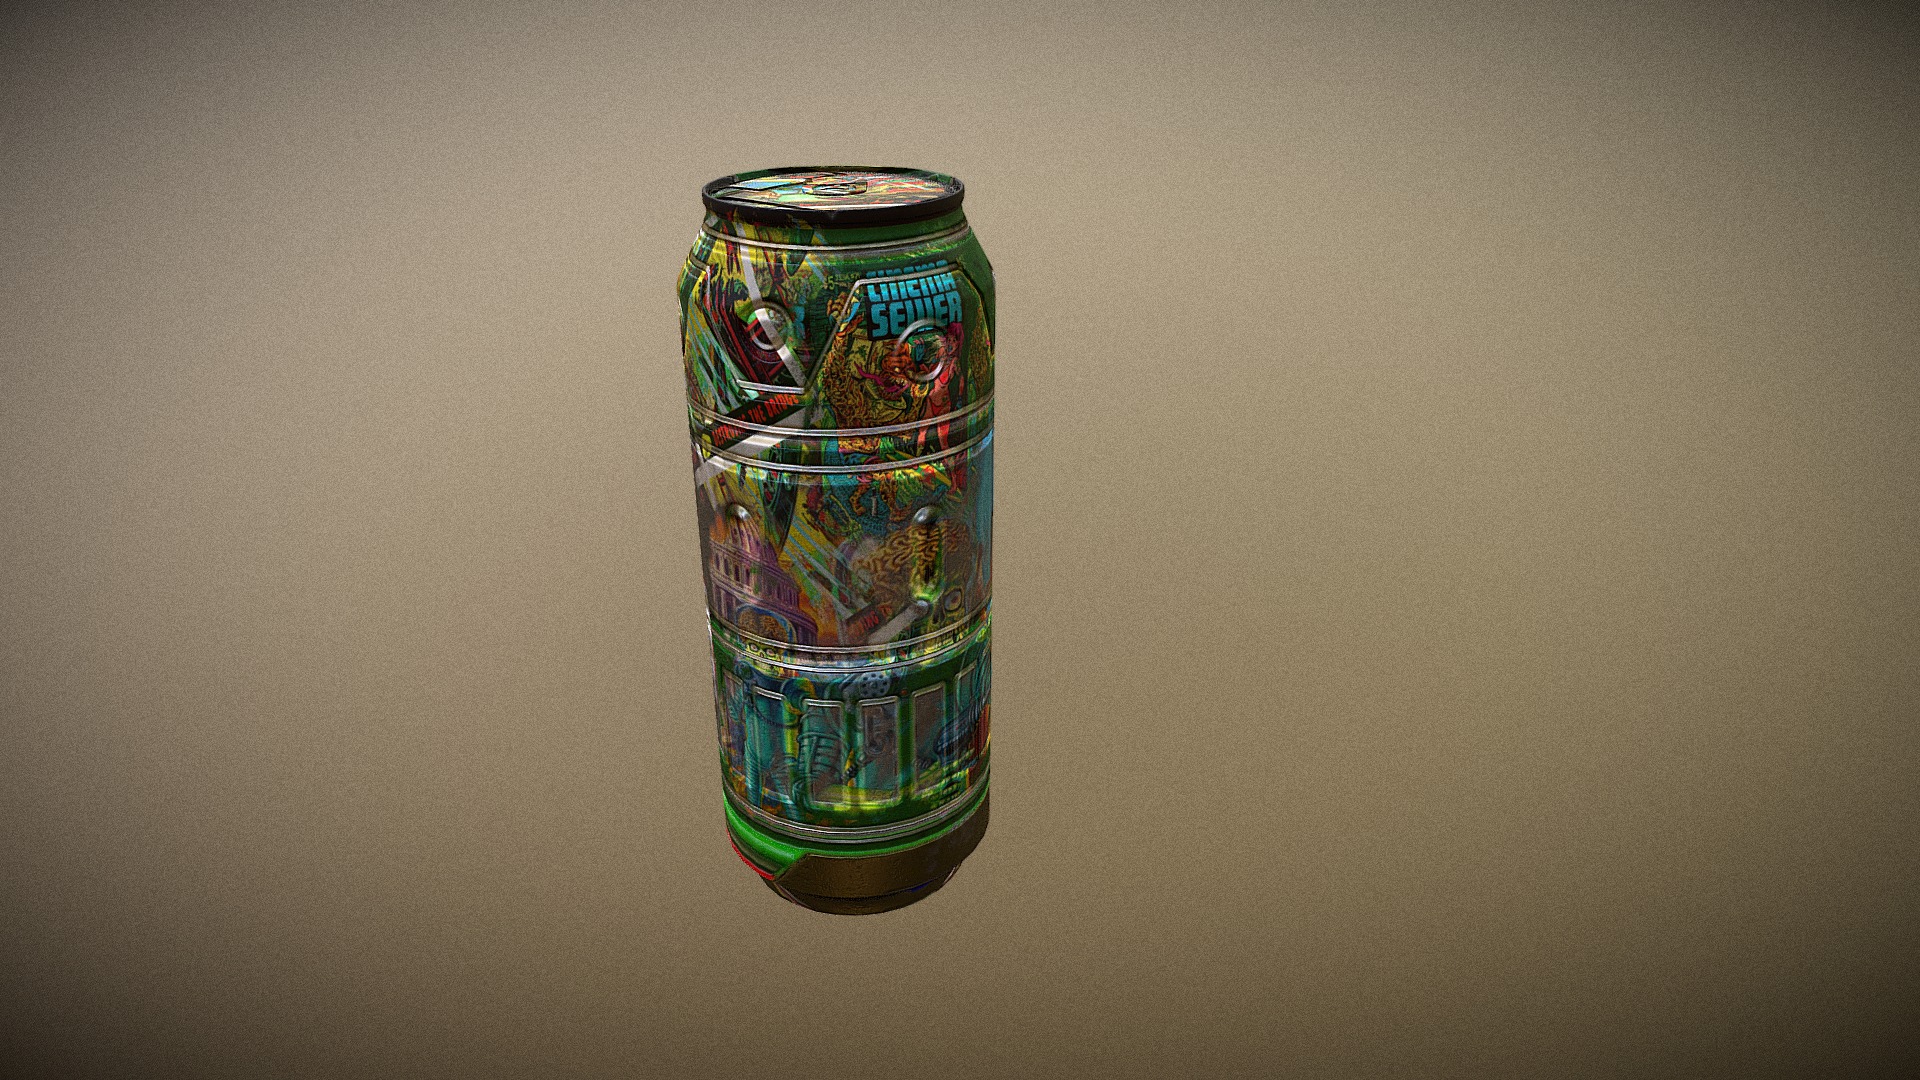 3D model Dark Angels V4 – Aliens do not die - This is a 3D model of the Dark Angels V4 - Aliens do not die. The 3D model is about a glass jar with colorful liquid.